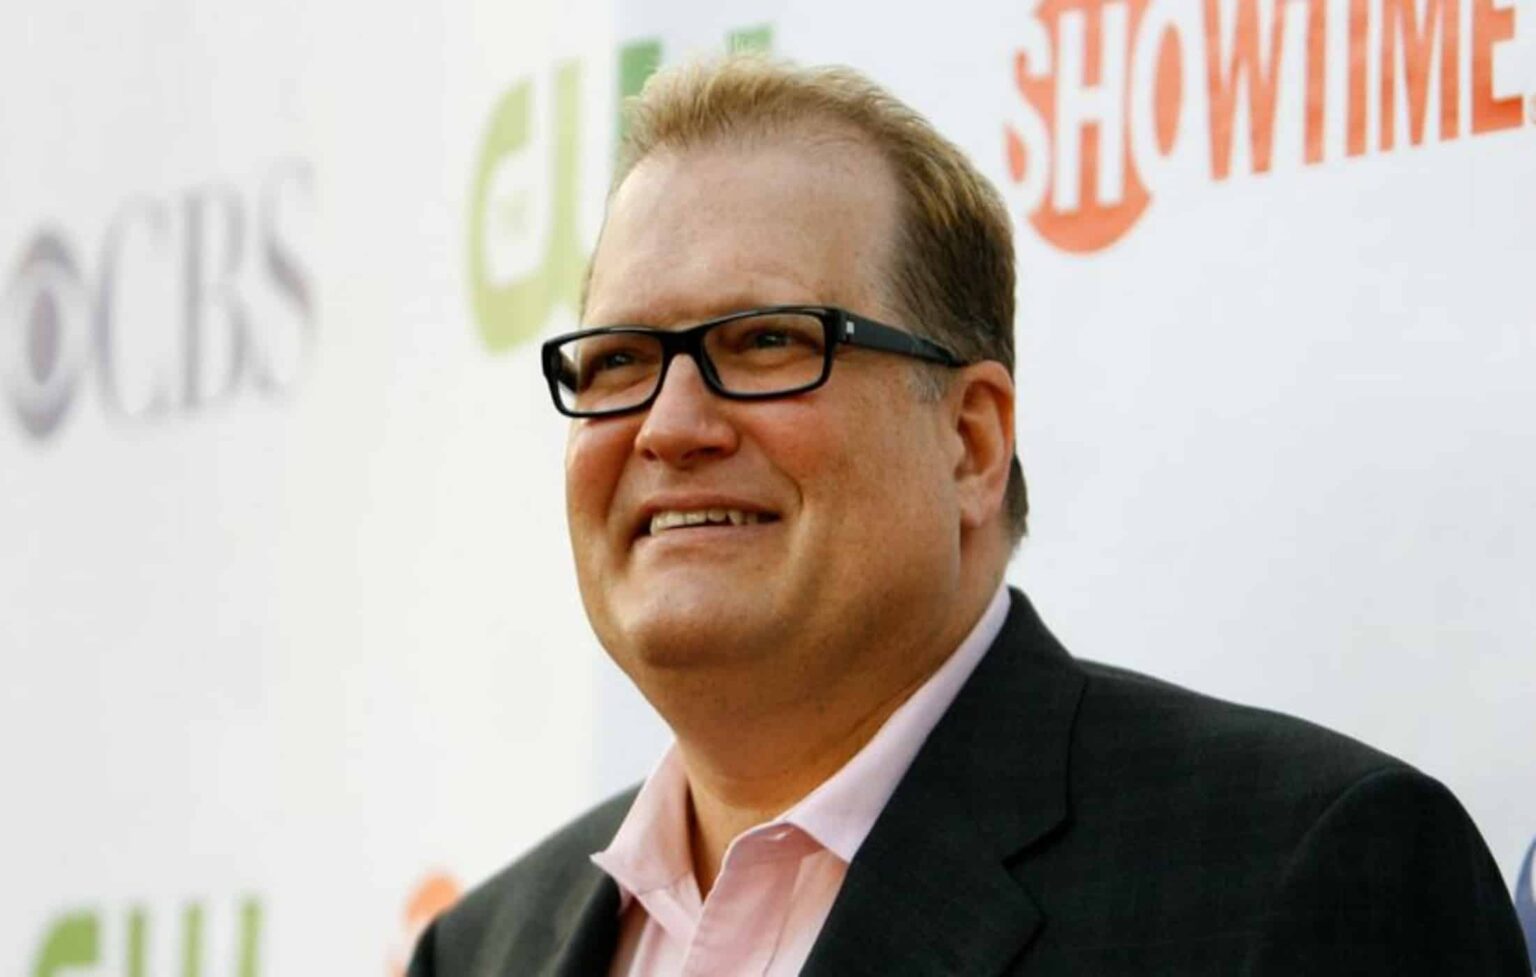 Drew Carey net worth, age, wiki, family, biography and latest updates